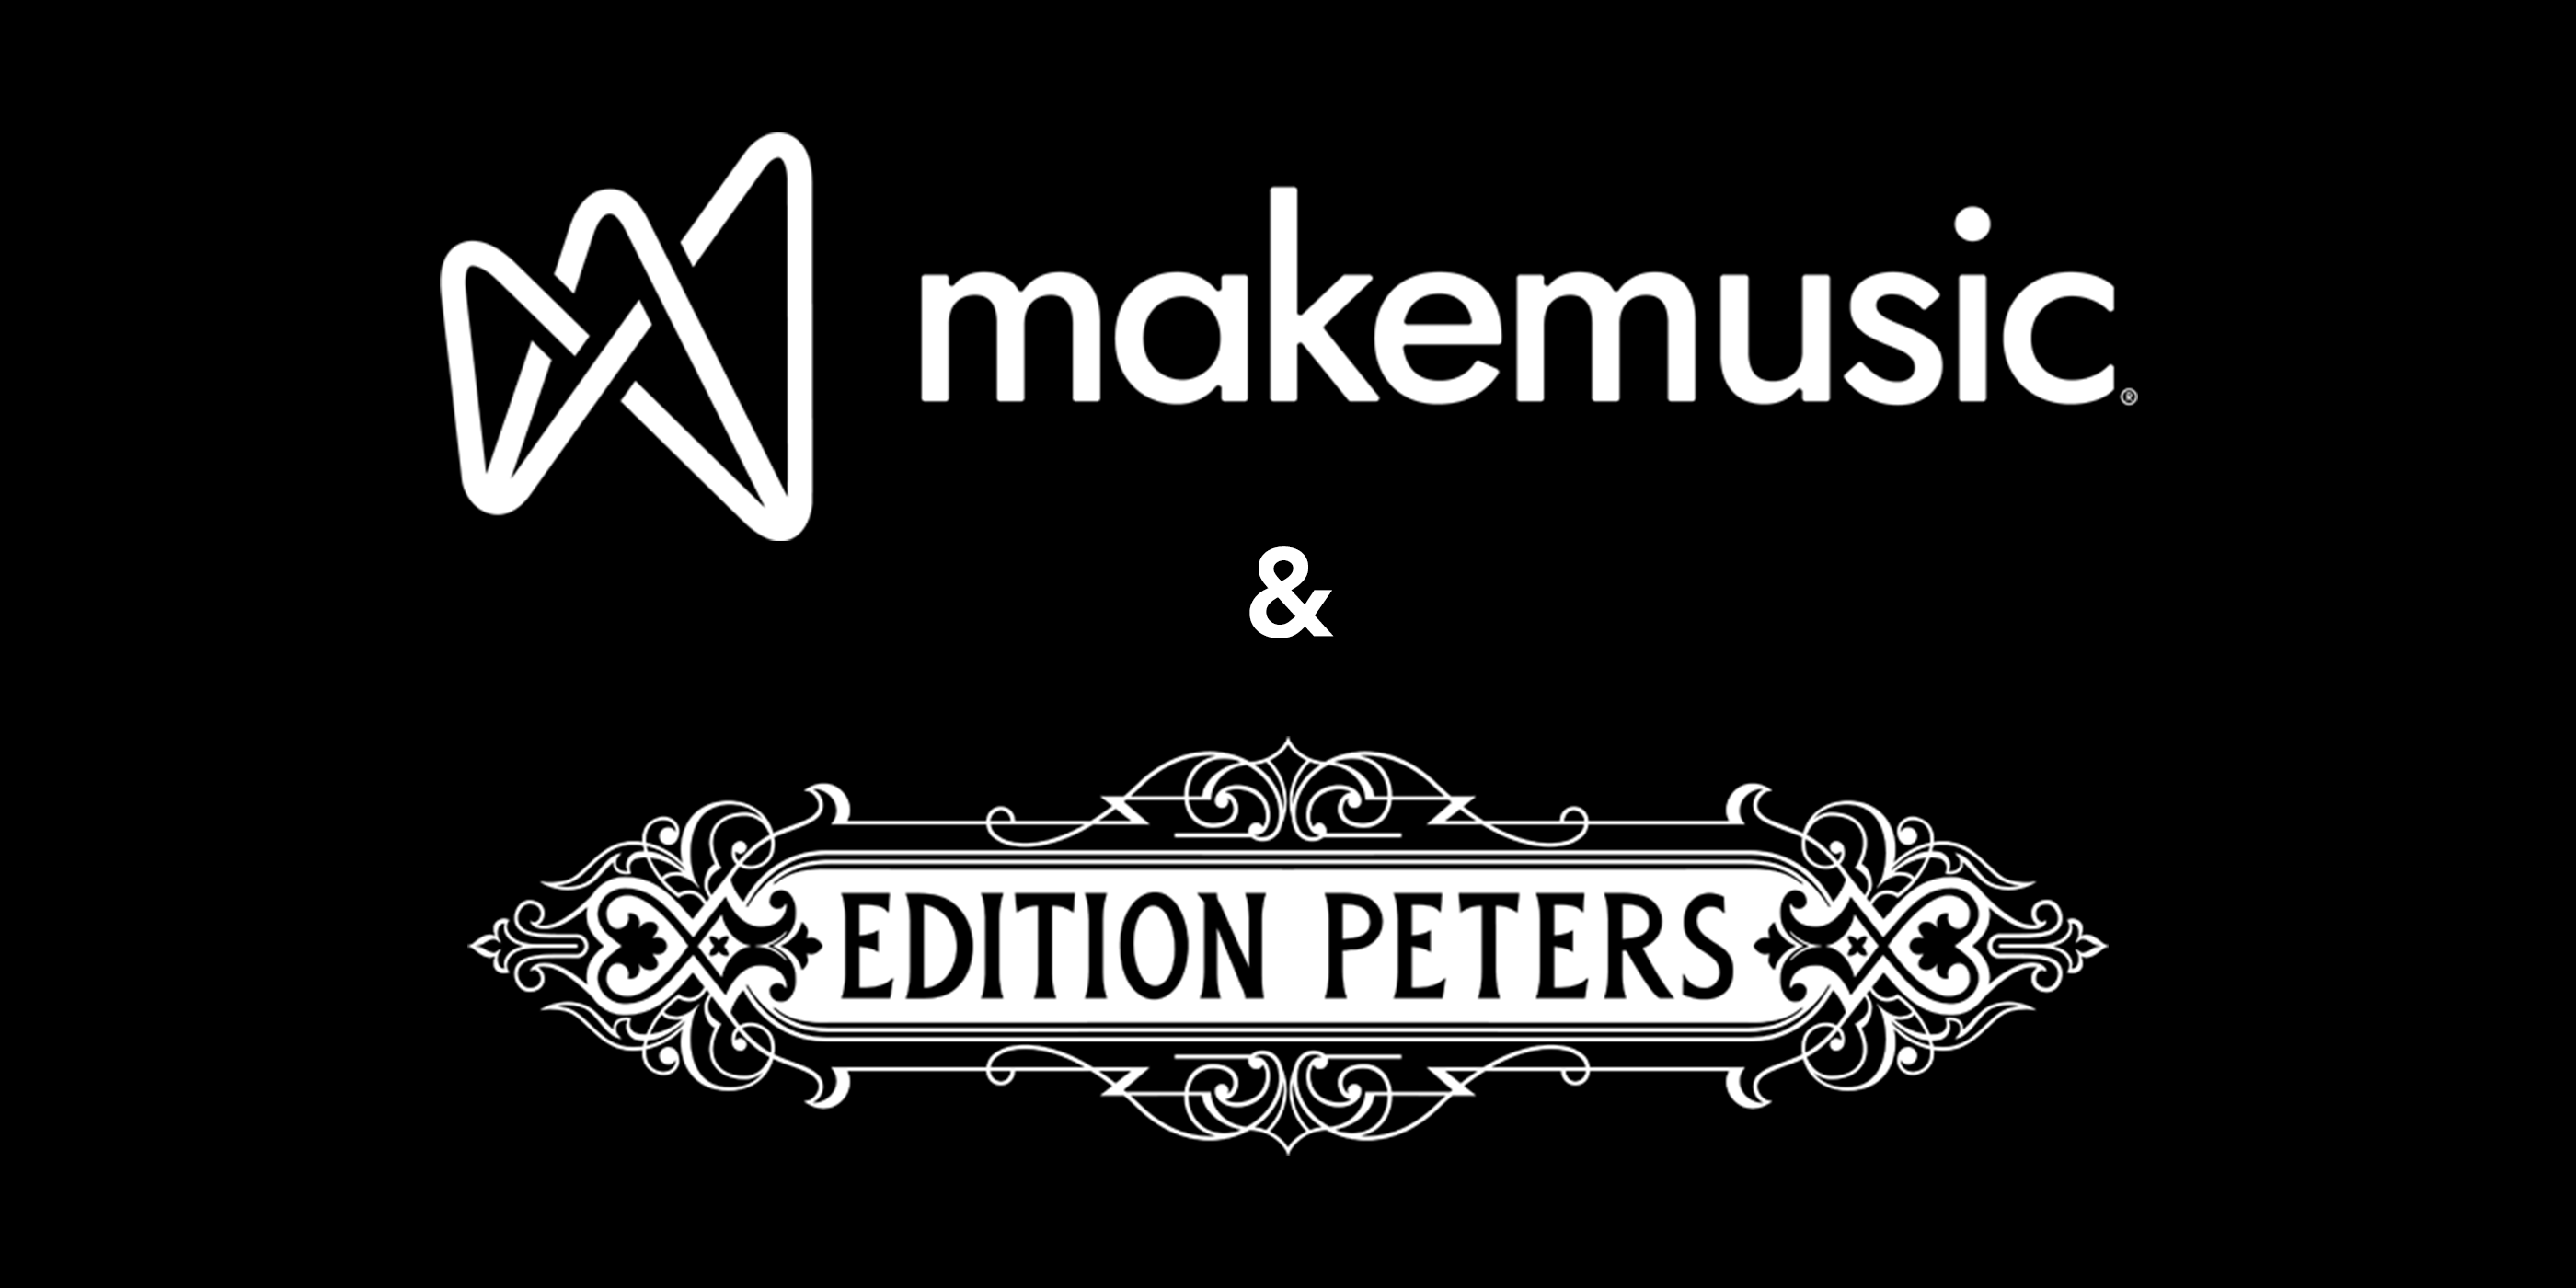 esta ahí triunfante Ecología Alfred Music and MakeMusic Announces Distribution Deal with Edition Peters  - MakeMusic